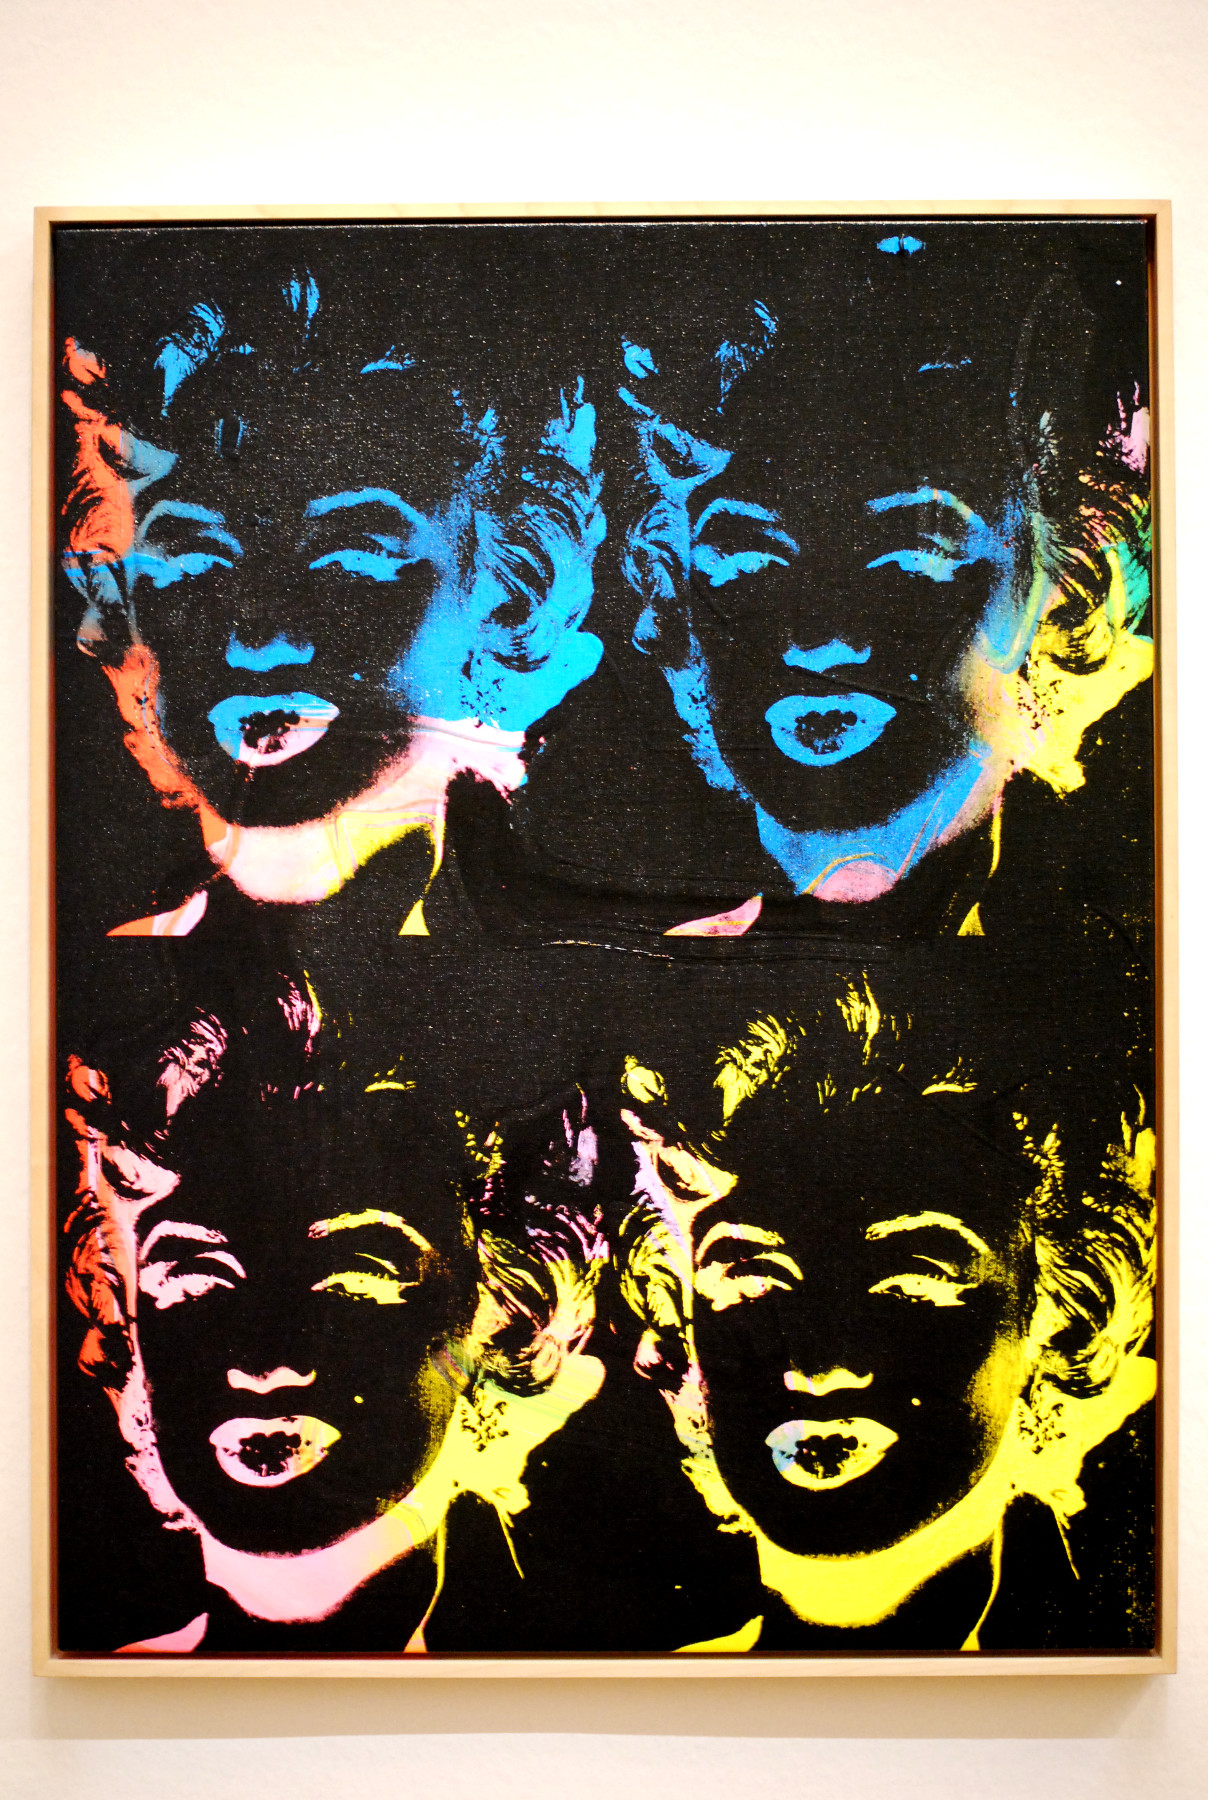 andy-warhol_four-multicoloured-marilyns_reversal-series_1979-1986_silkscreen-on-canvas